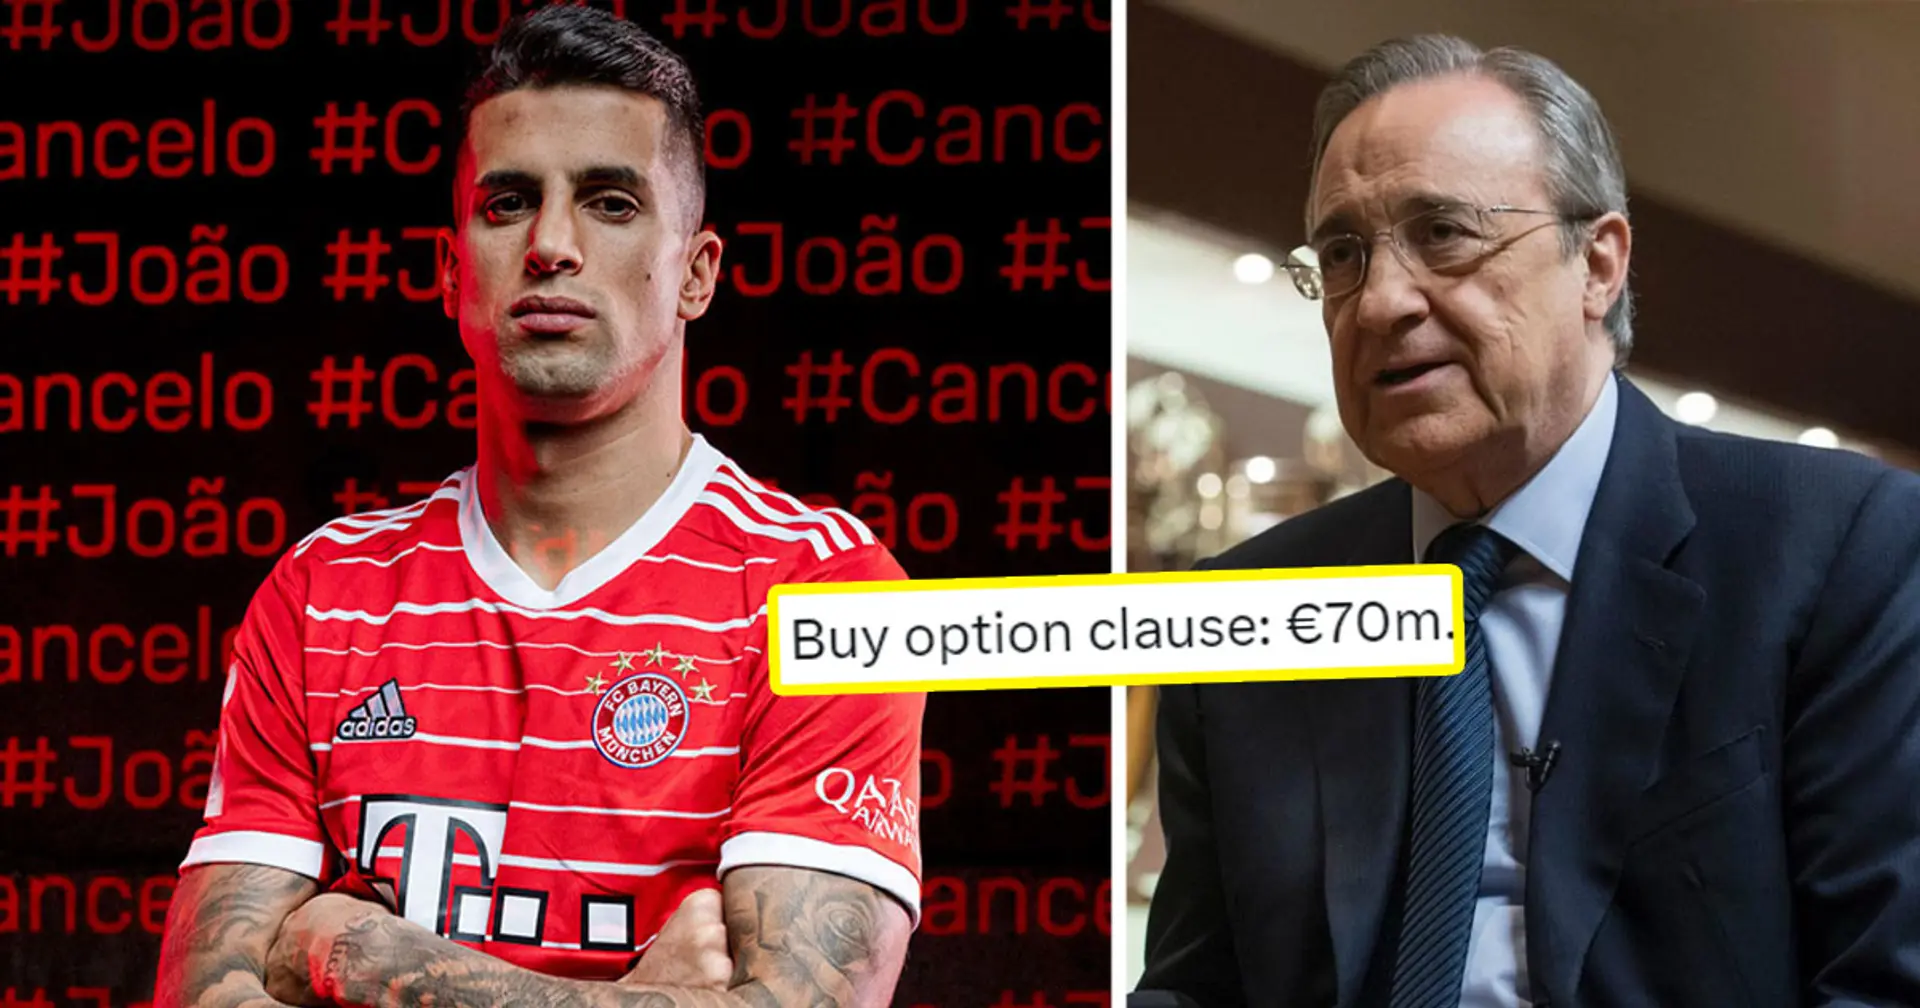 Revealed: Joao Cancelo's agent offered right-back to Madrid, 2 reasons why club rejected 